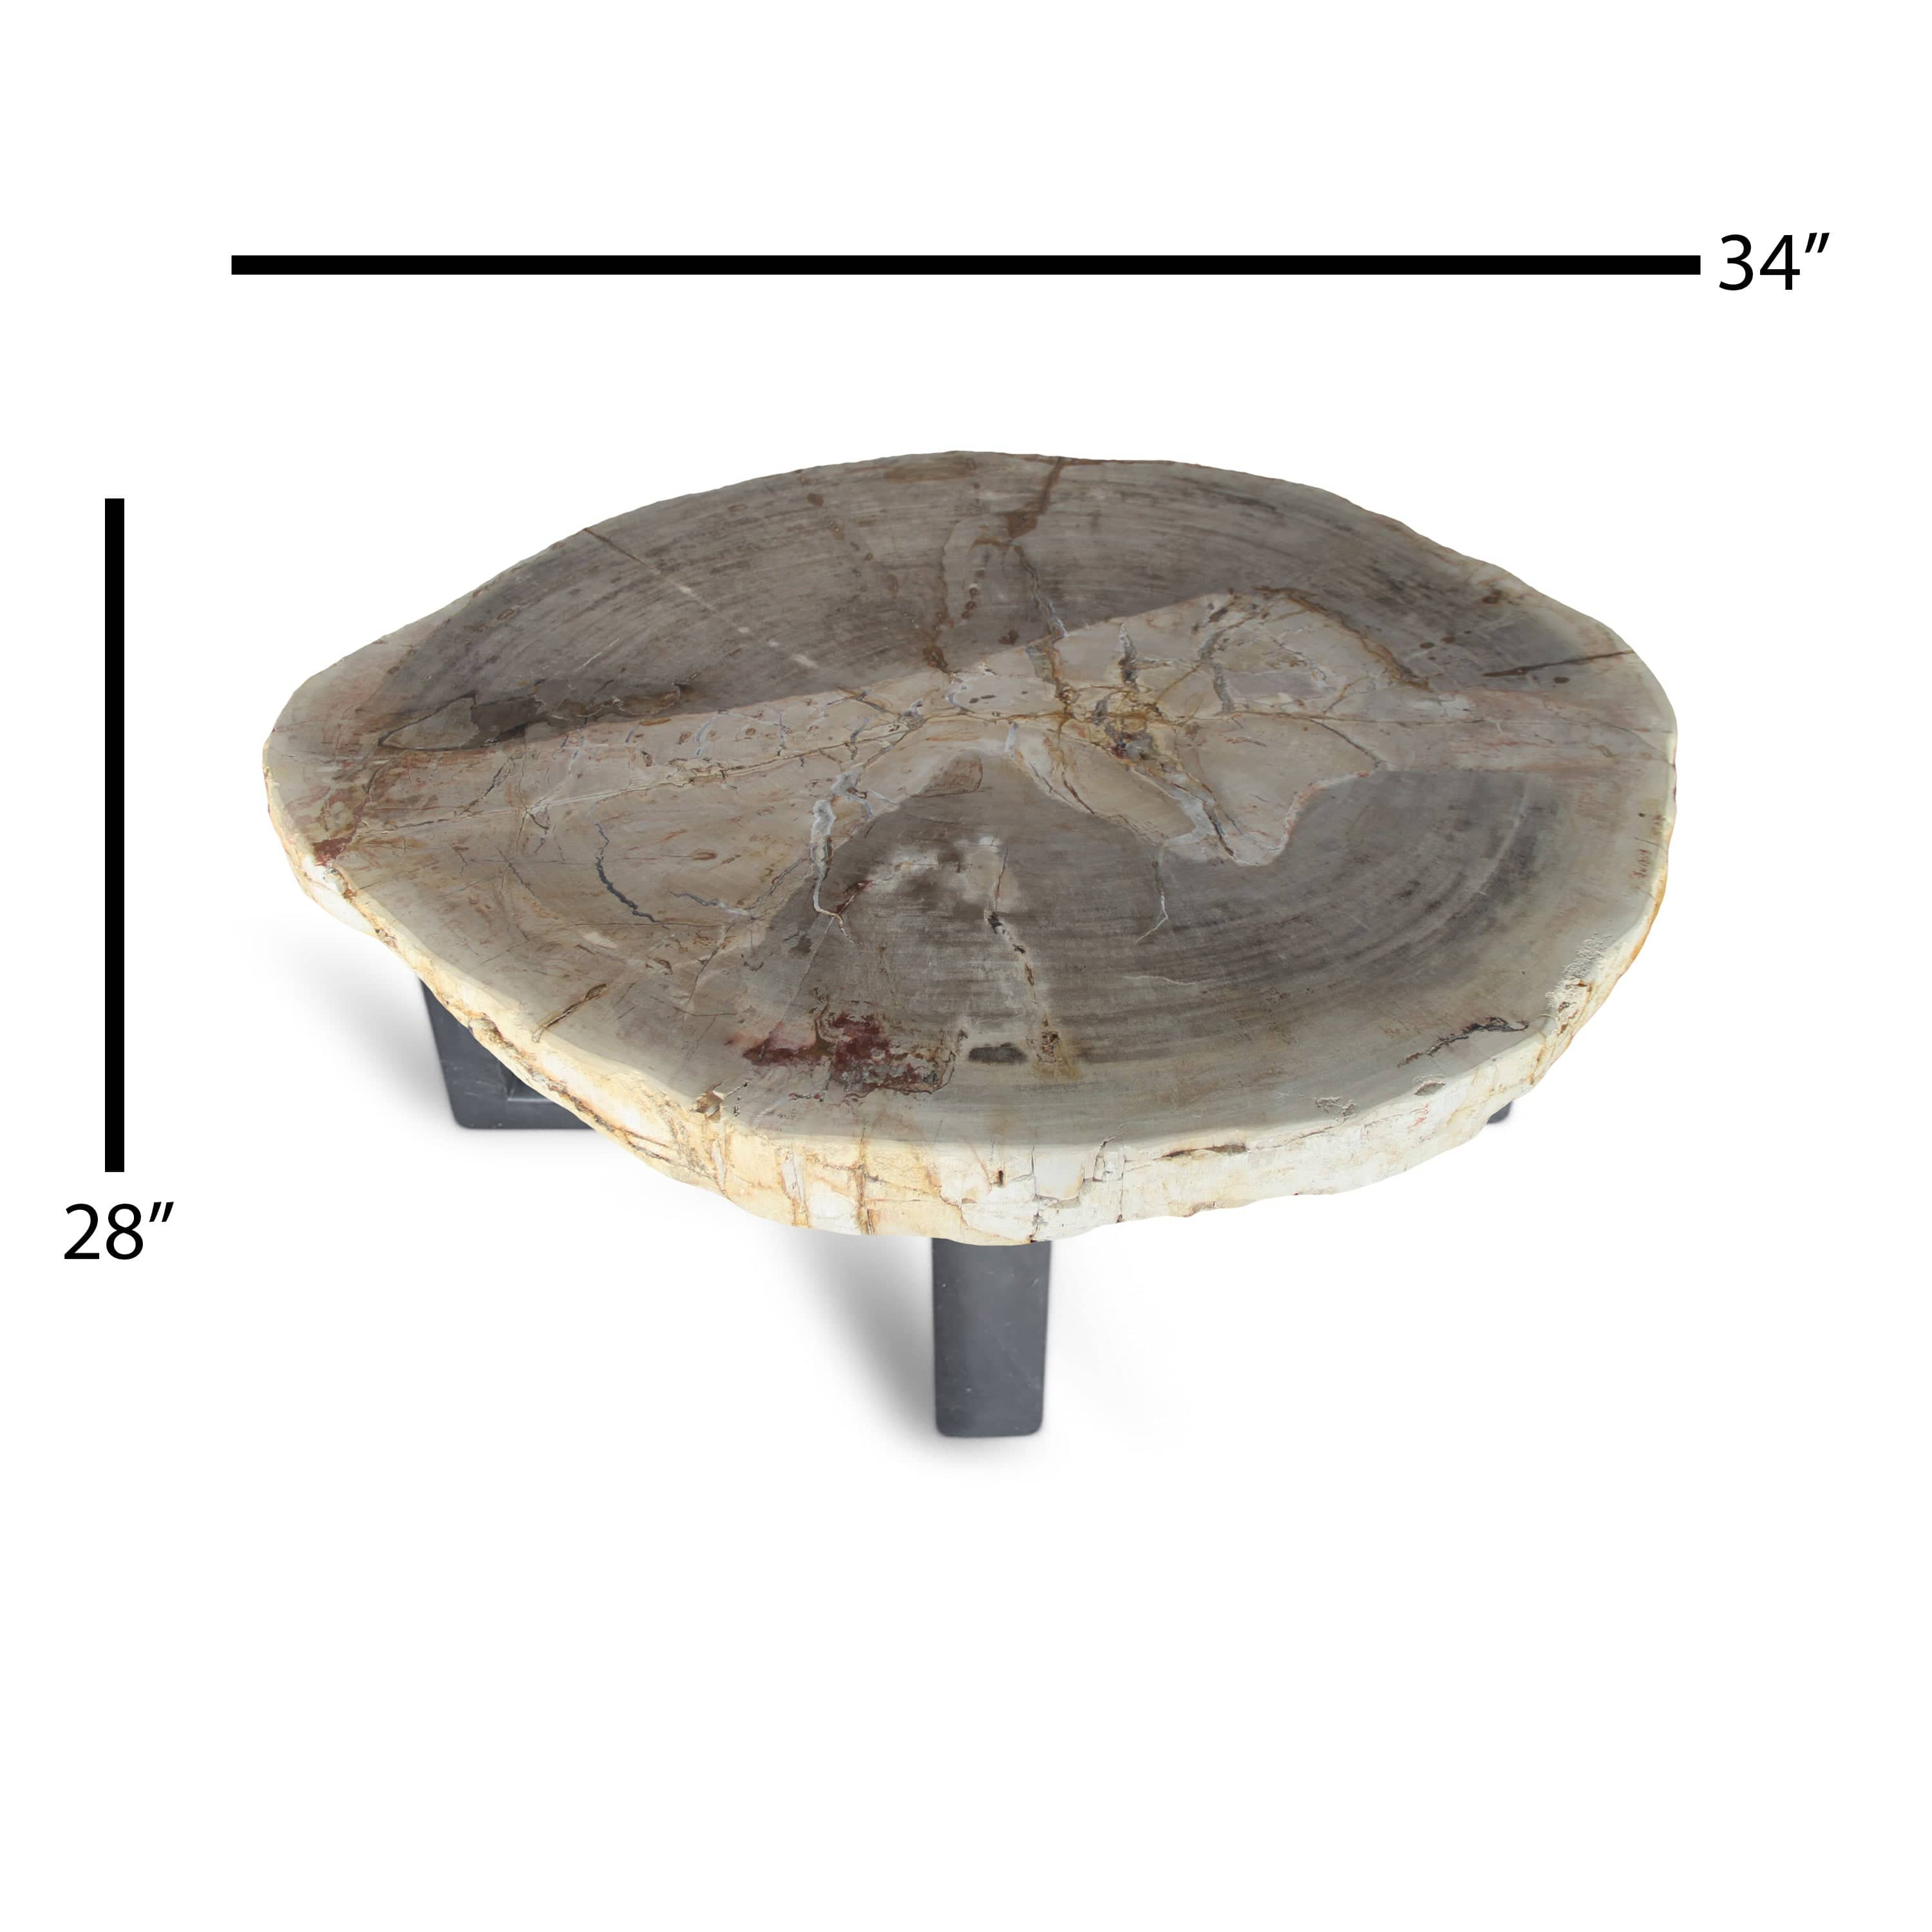 Kalifano Petrified Wood Petrified Wood Round Slab Coffee Table from Indonesia - 34" / 165 lbs PWT6000.004